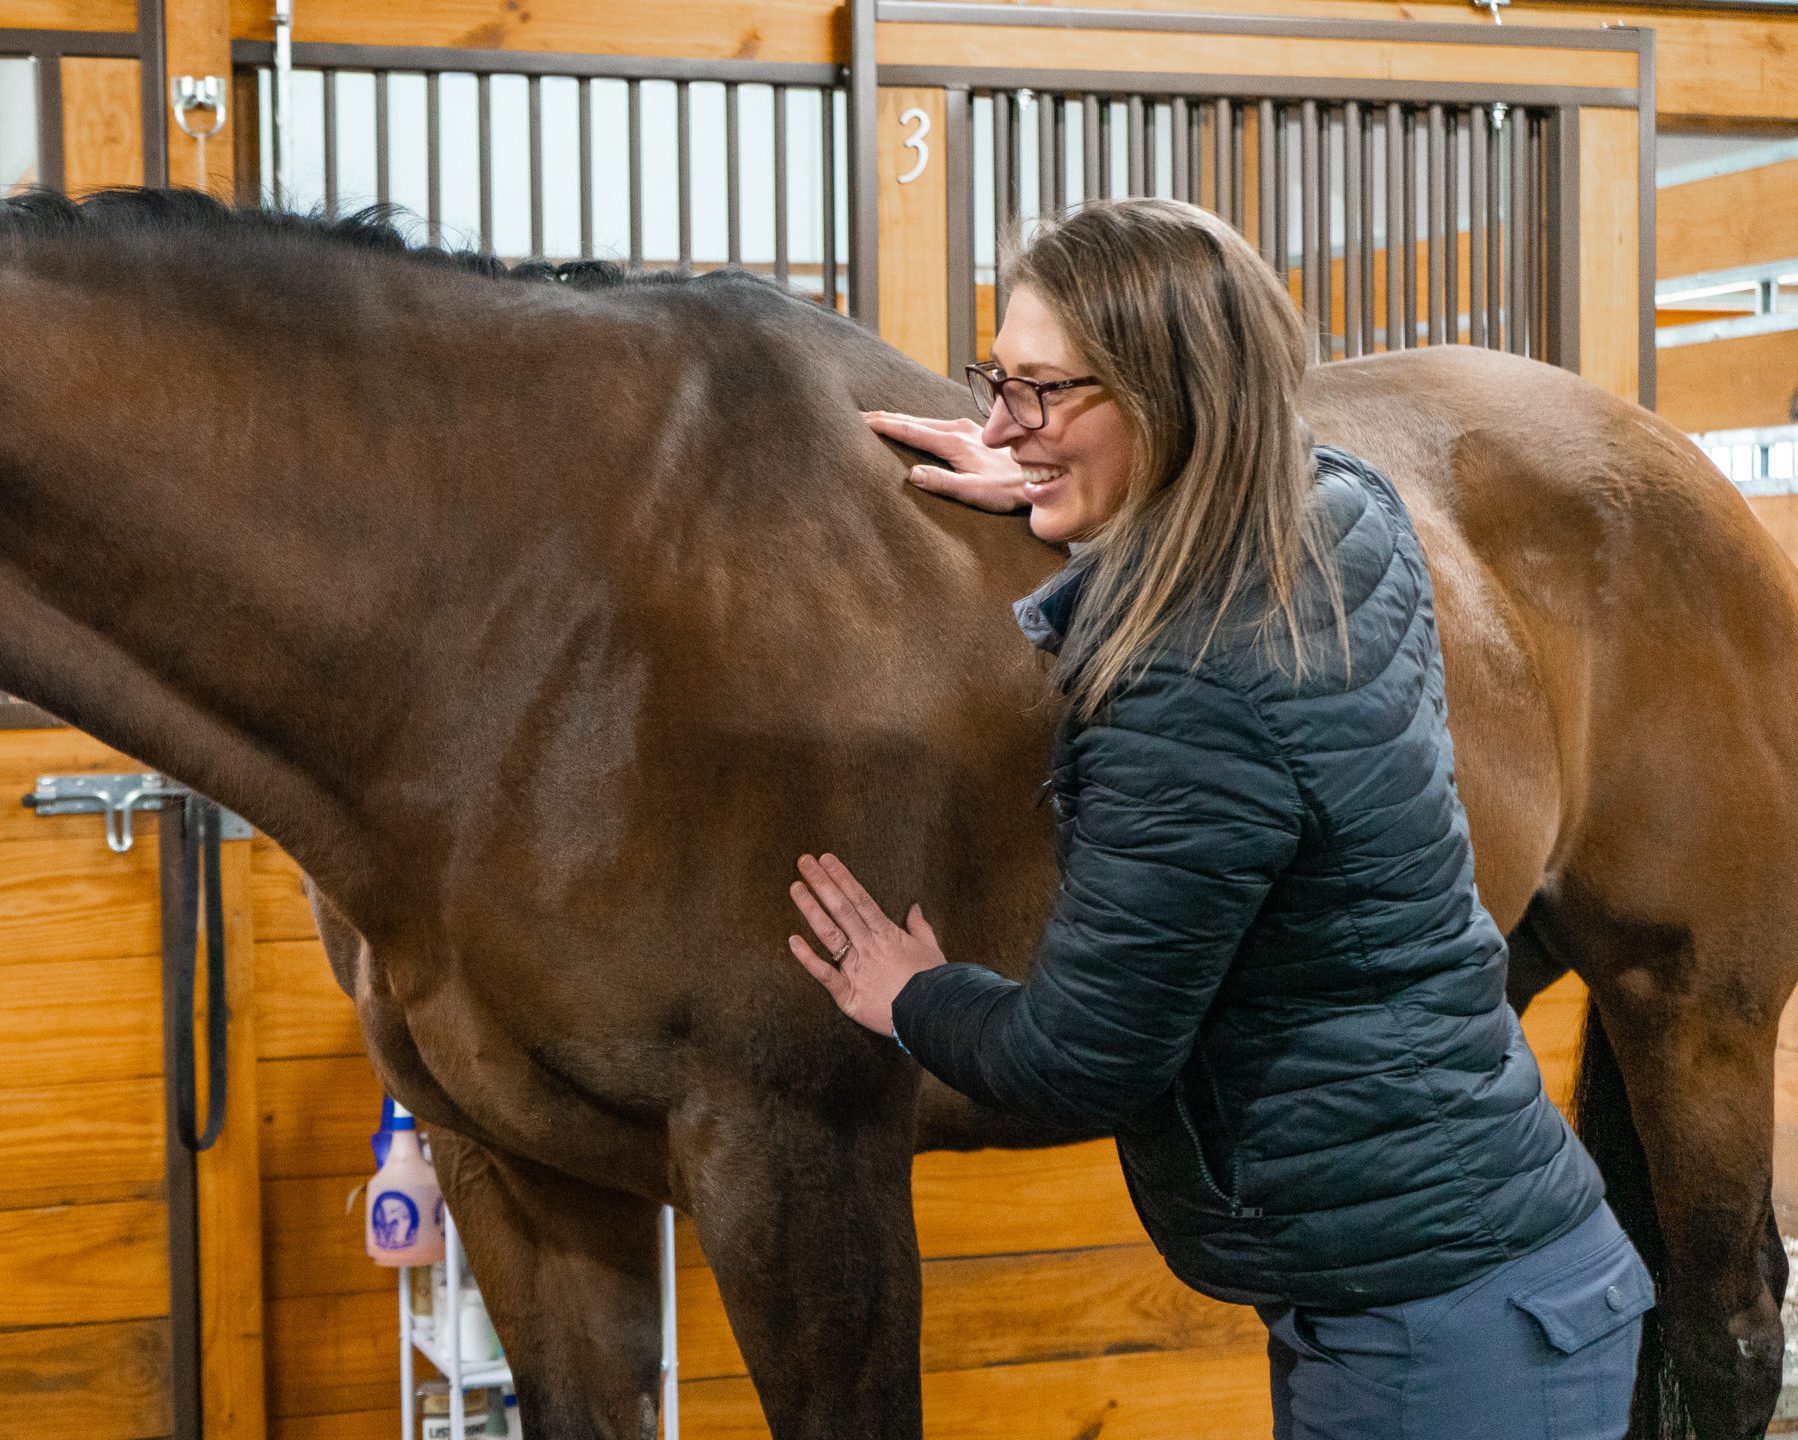 Dr. Iverson performs trigger point therapy on a horse at Iverson Equine